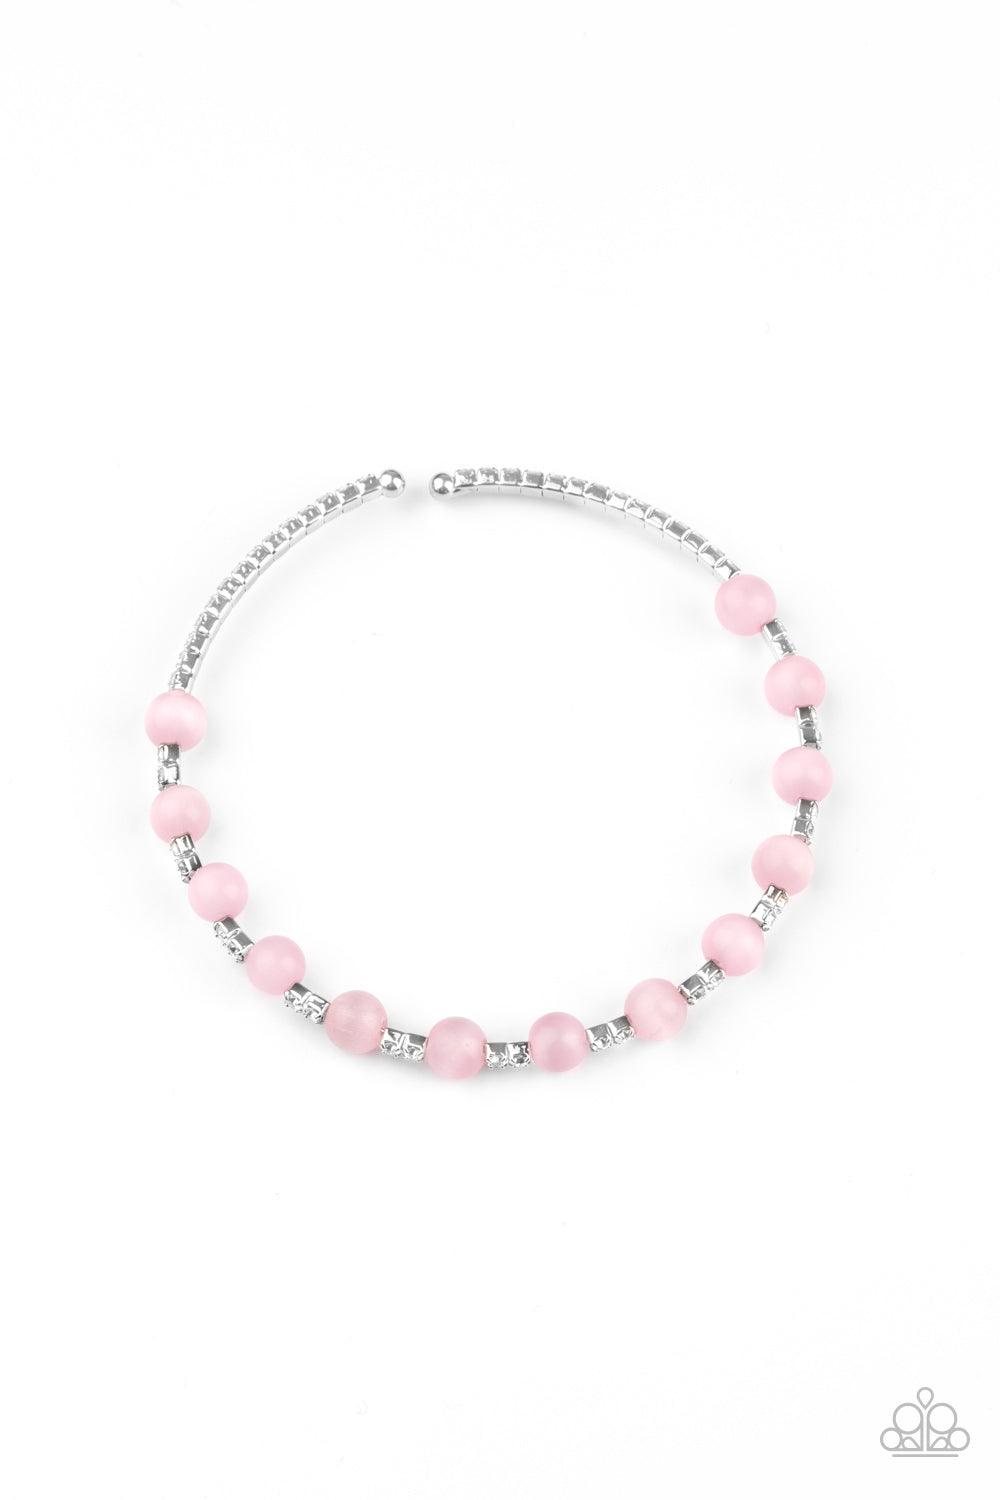 Paparazzi Accessories Tea Party Twinkle - Pink Glassy pink cat's eye stones are fitted in place along a dainty strand of glassy white rhinestones, creating a twinkly cuff around the wrist. Sold as one individual bracelet Jewelry